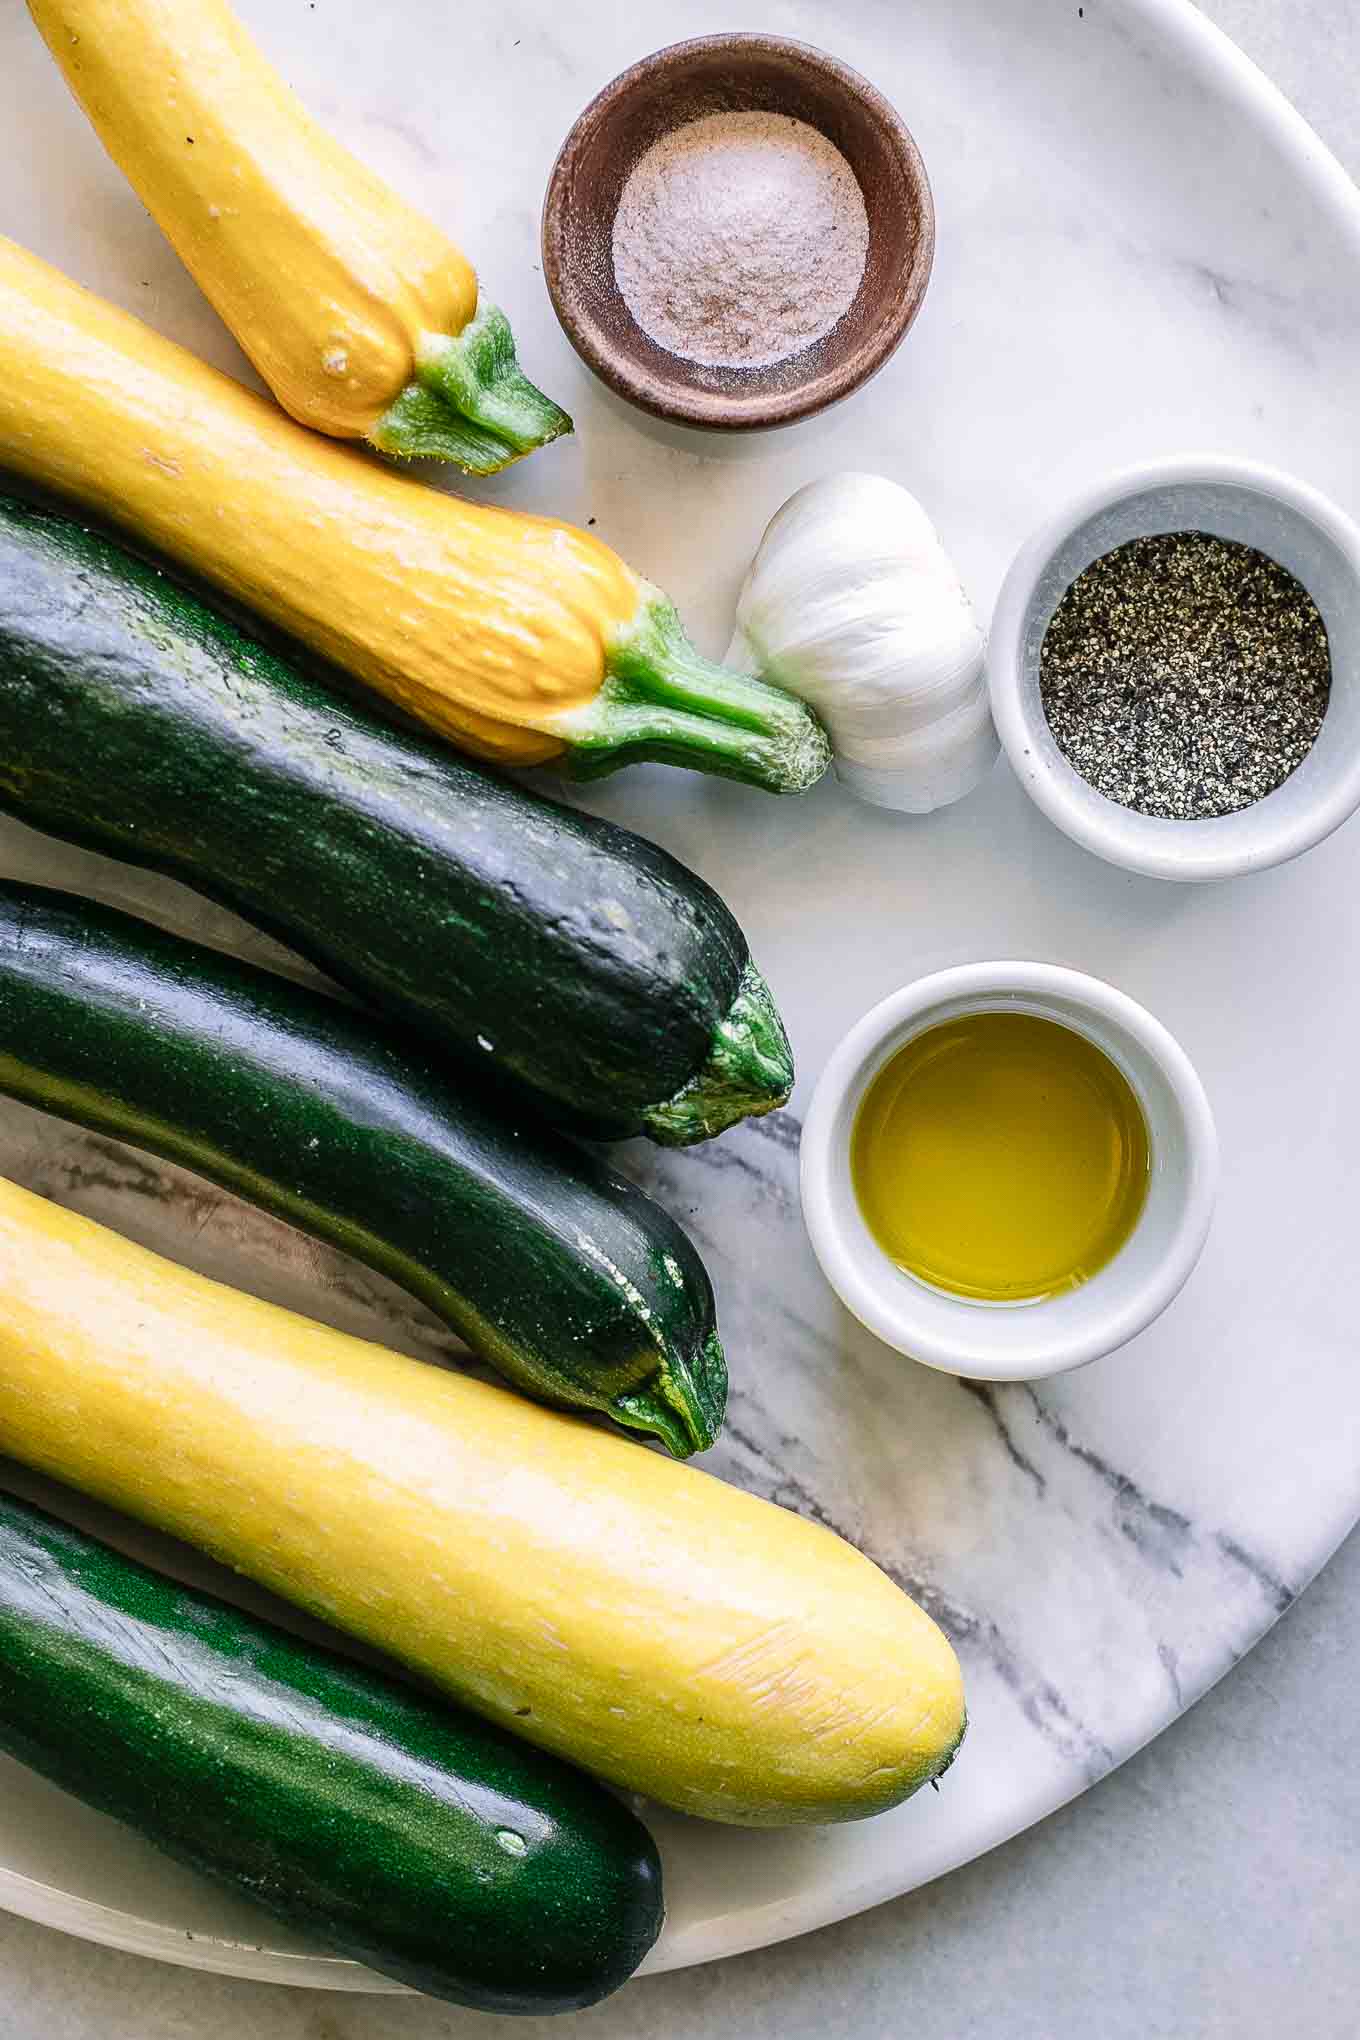 zucchini, summer squash, and bowls of oil, salt, pepper, and garlic on a white table